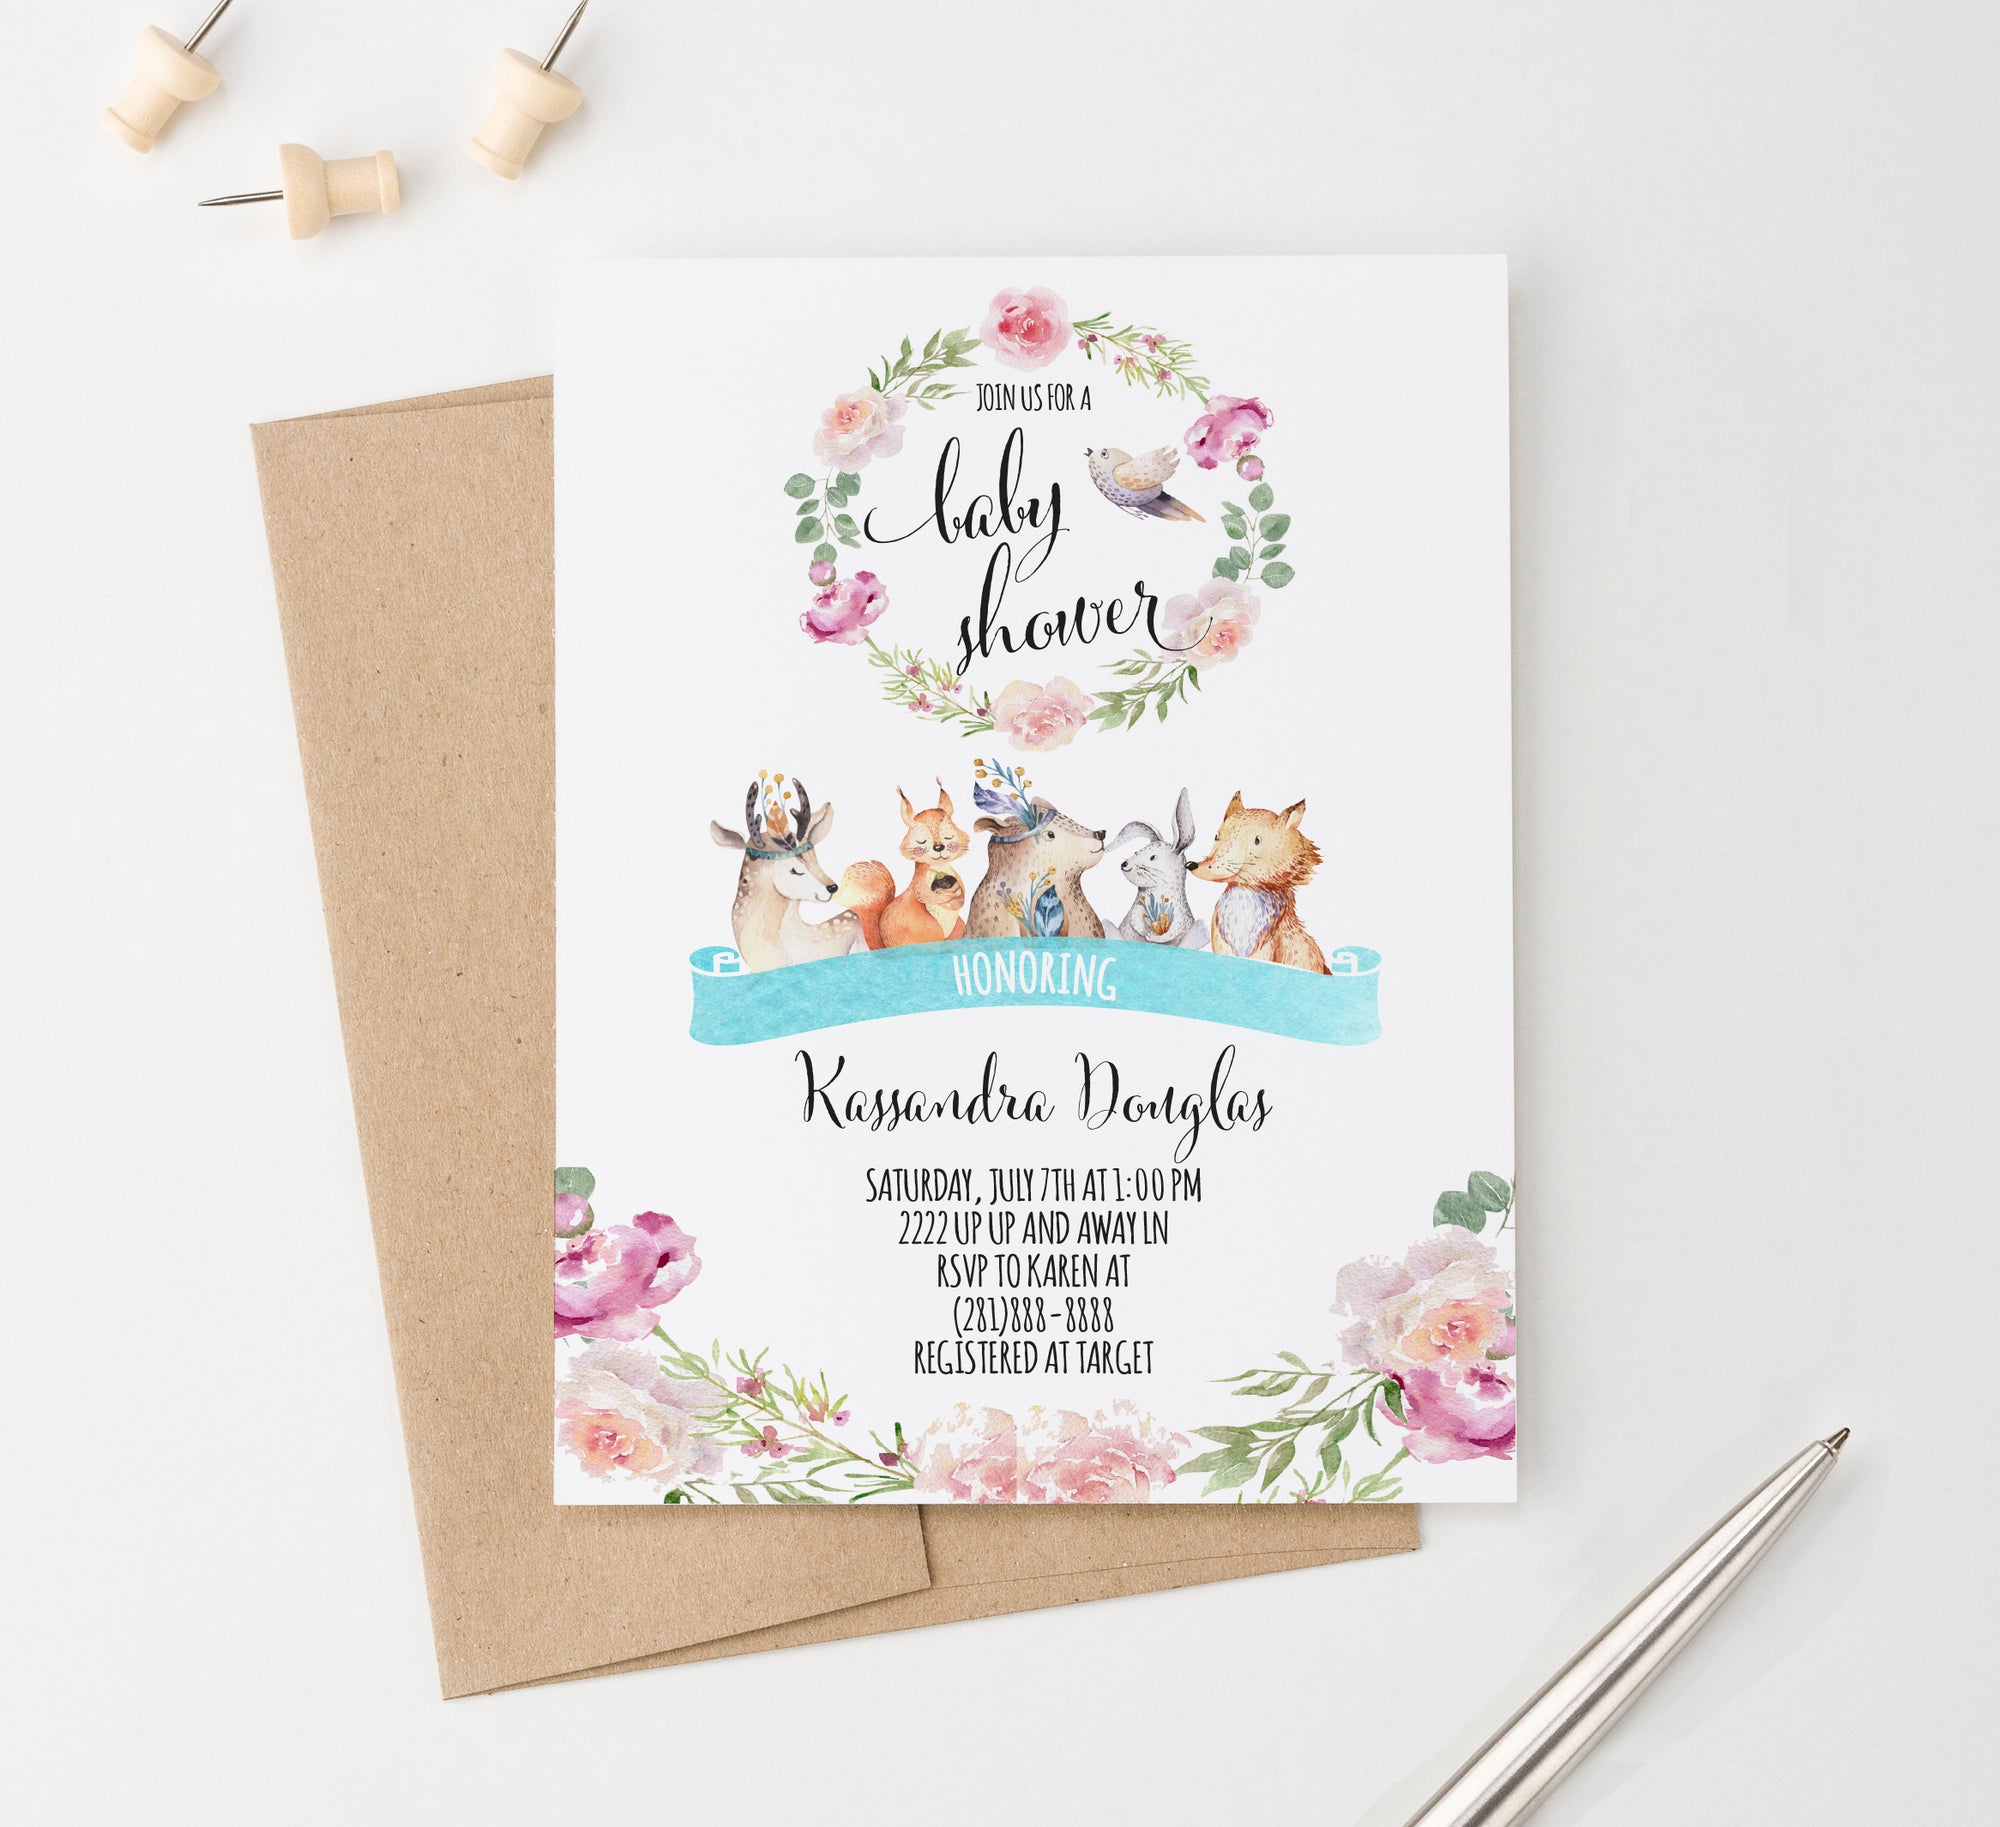 Personalized Floral Greenery Baby Shower Invites With Woodland Animals